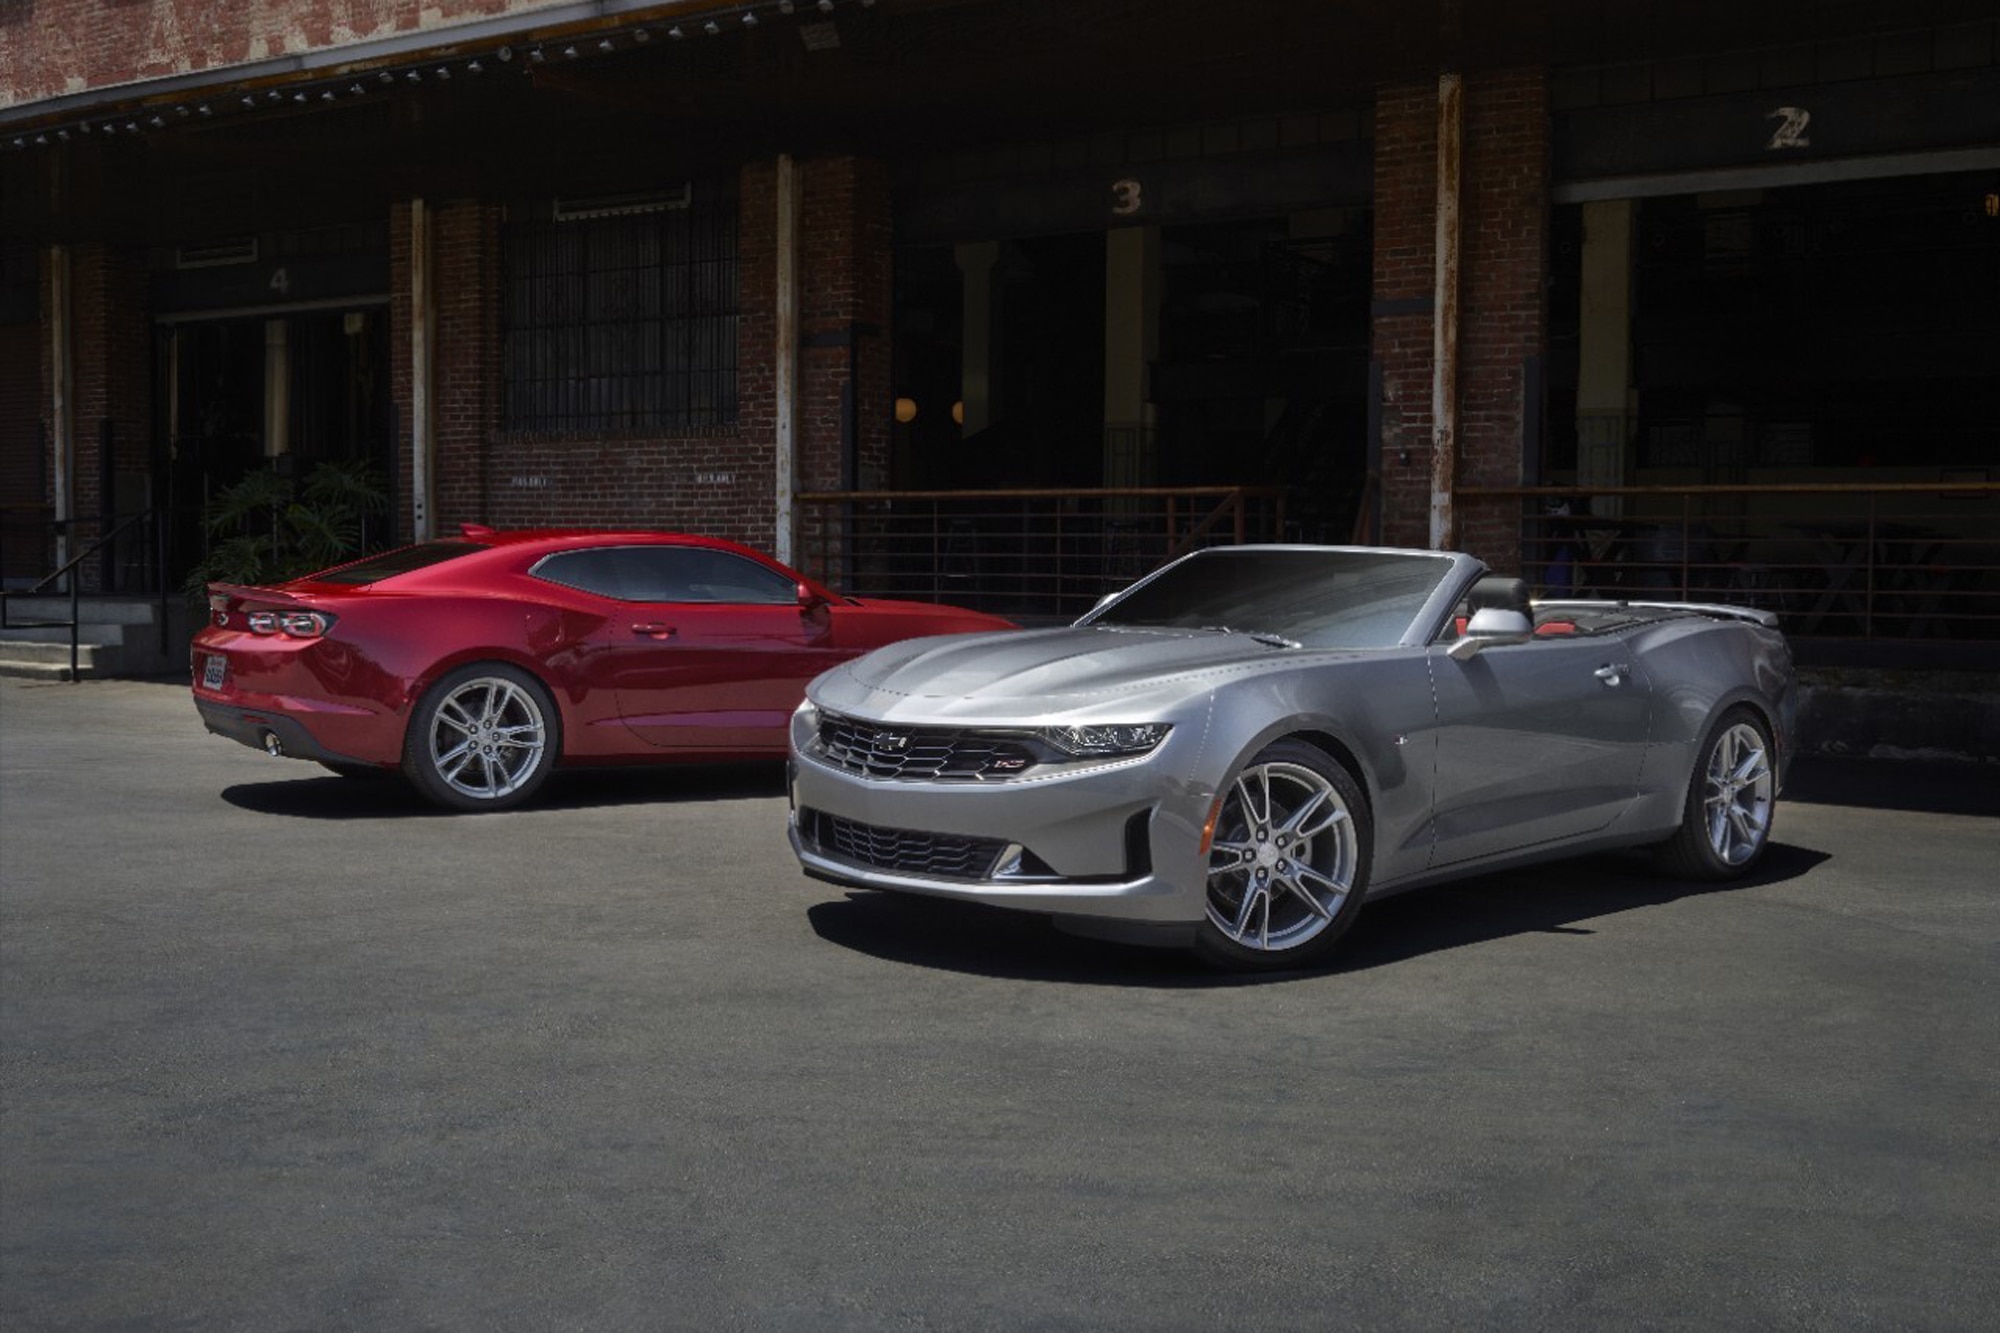 2022 Chevrolet Camaro coupe and convertible